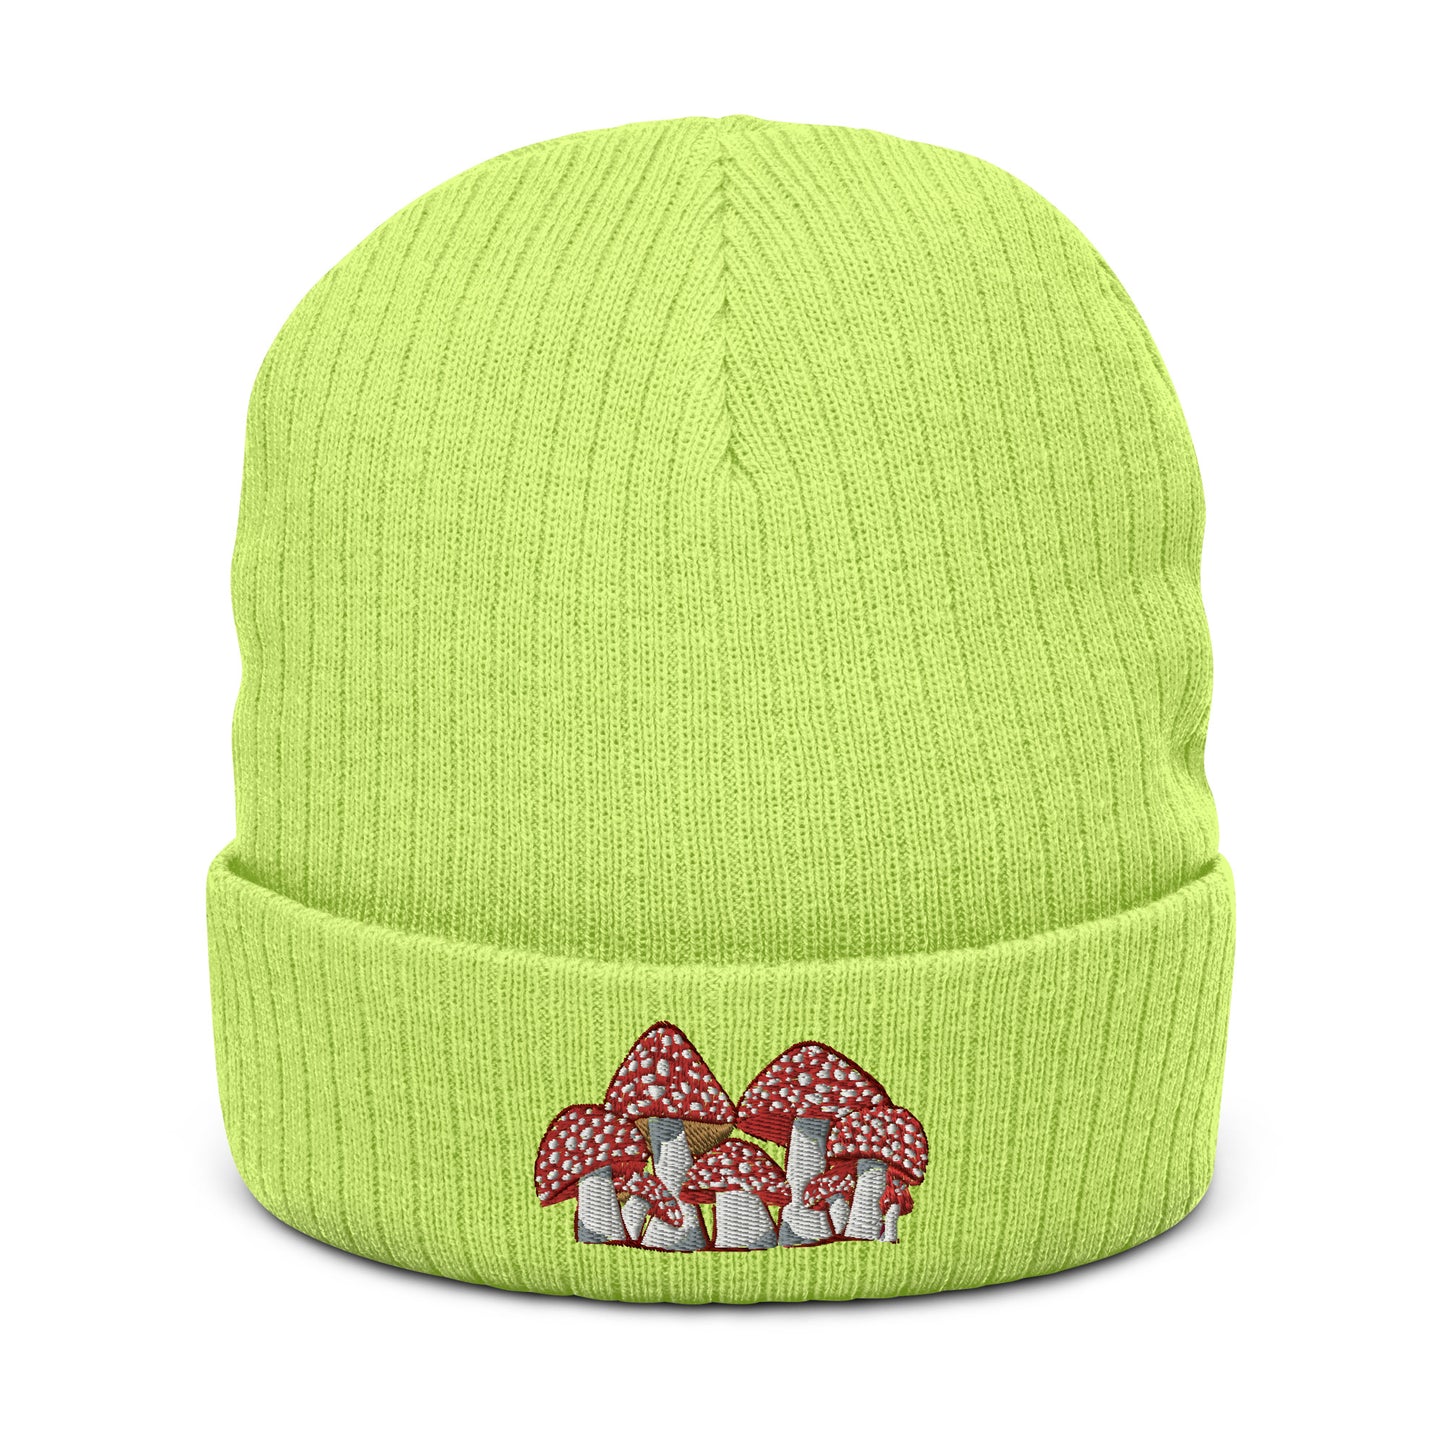 A neon green ribbed knit beanie has an embroidery of Fly Agaric mushrooms on the front.